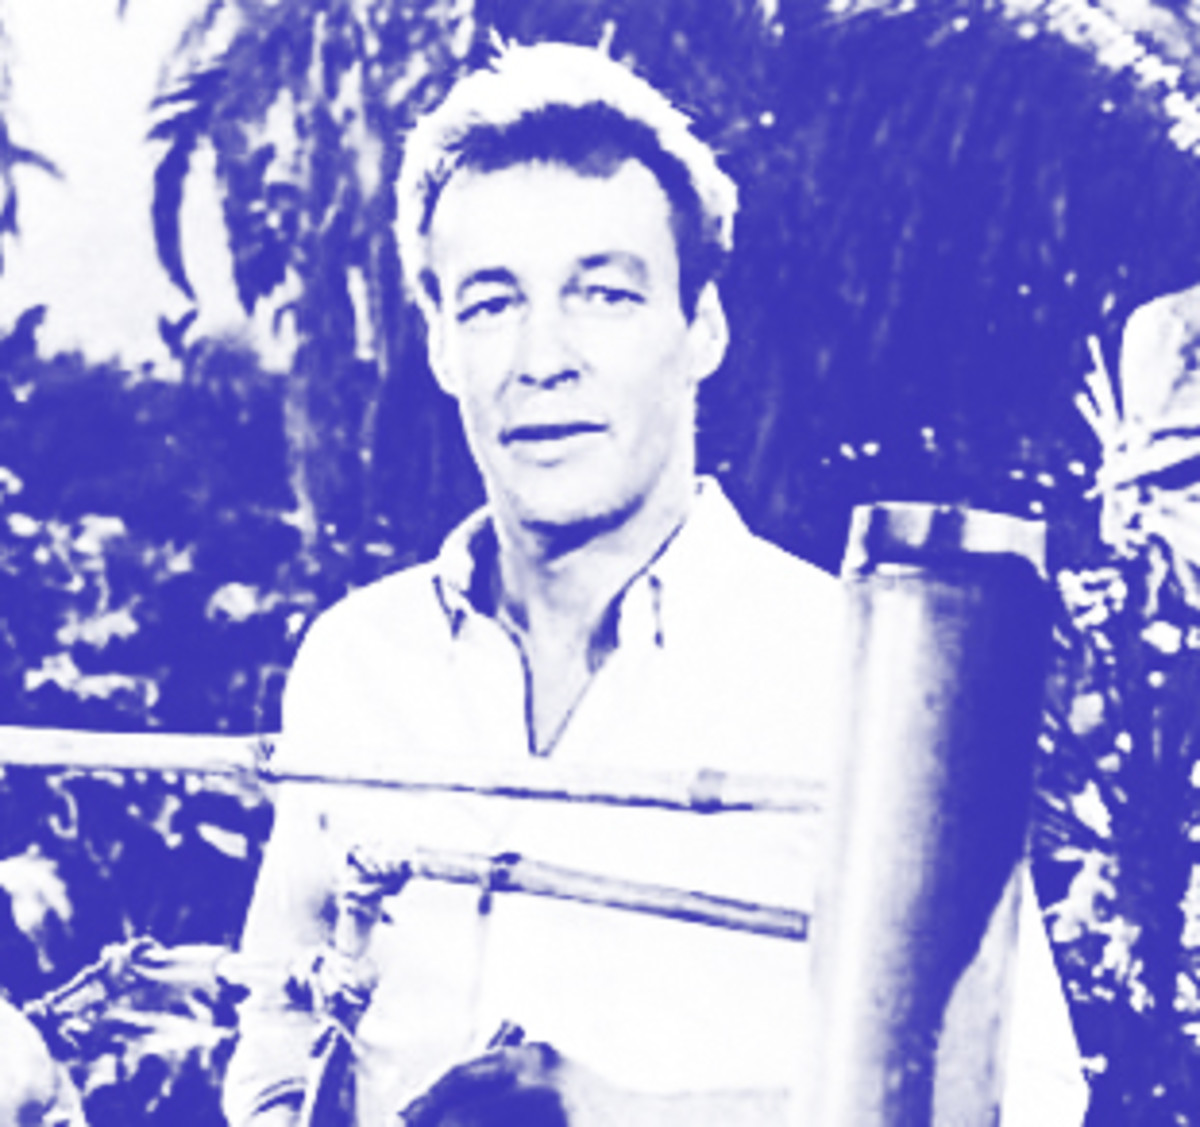 Reflections On Professor Roy Hinkley Ph.D. and His Time On Gilligan's Island